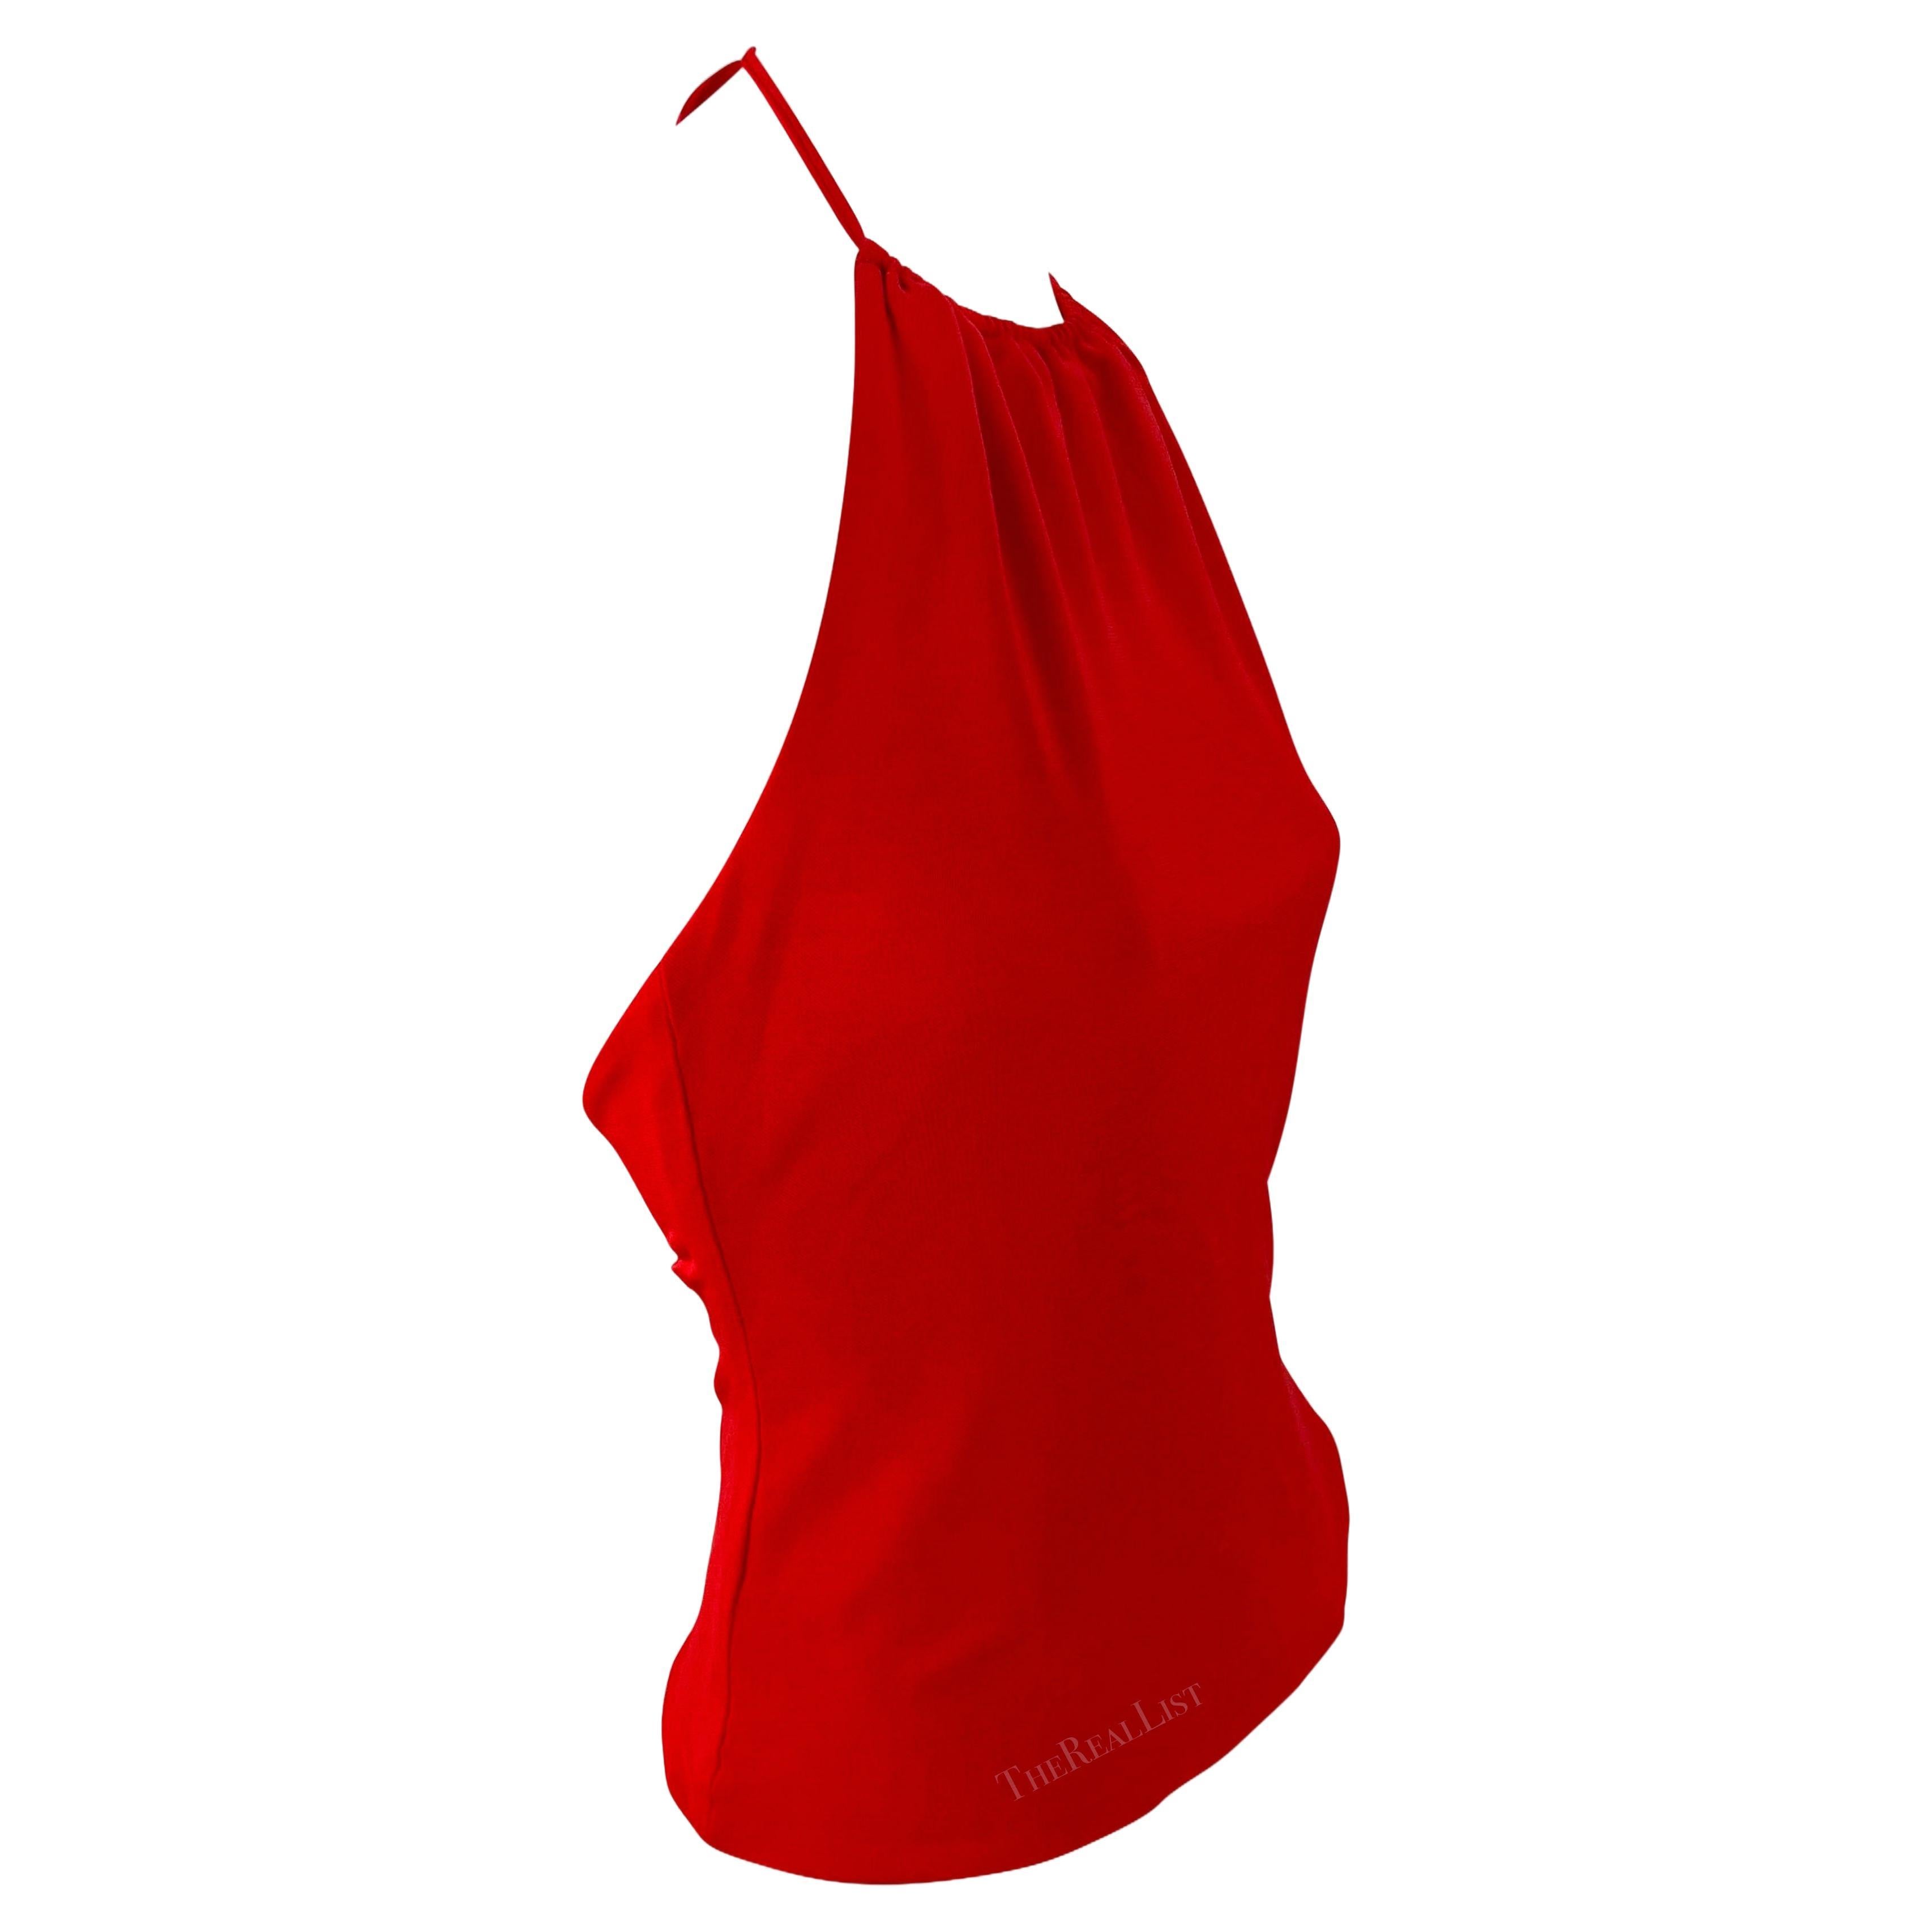 Presenting a fabulous cherry red halterneck top by Yigal Azrouël from the early 2000s. This bright red top boasts a halterneck tie and a partially exposed back.

Approximate measurements:
Size - 4US
Shoulder to hem: 15